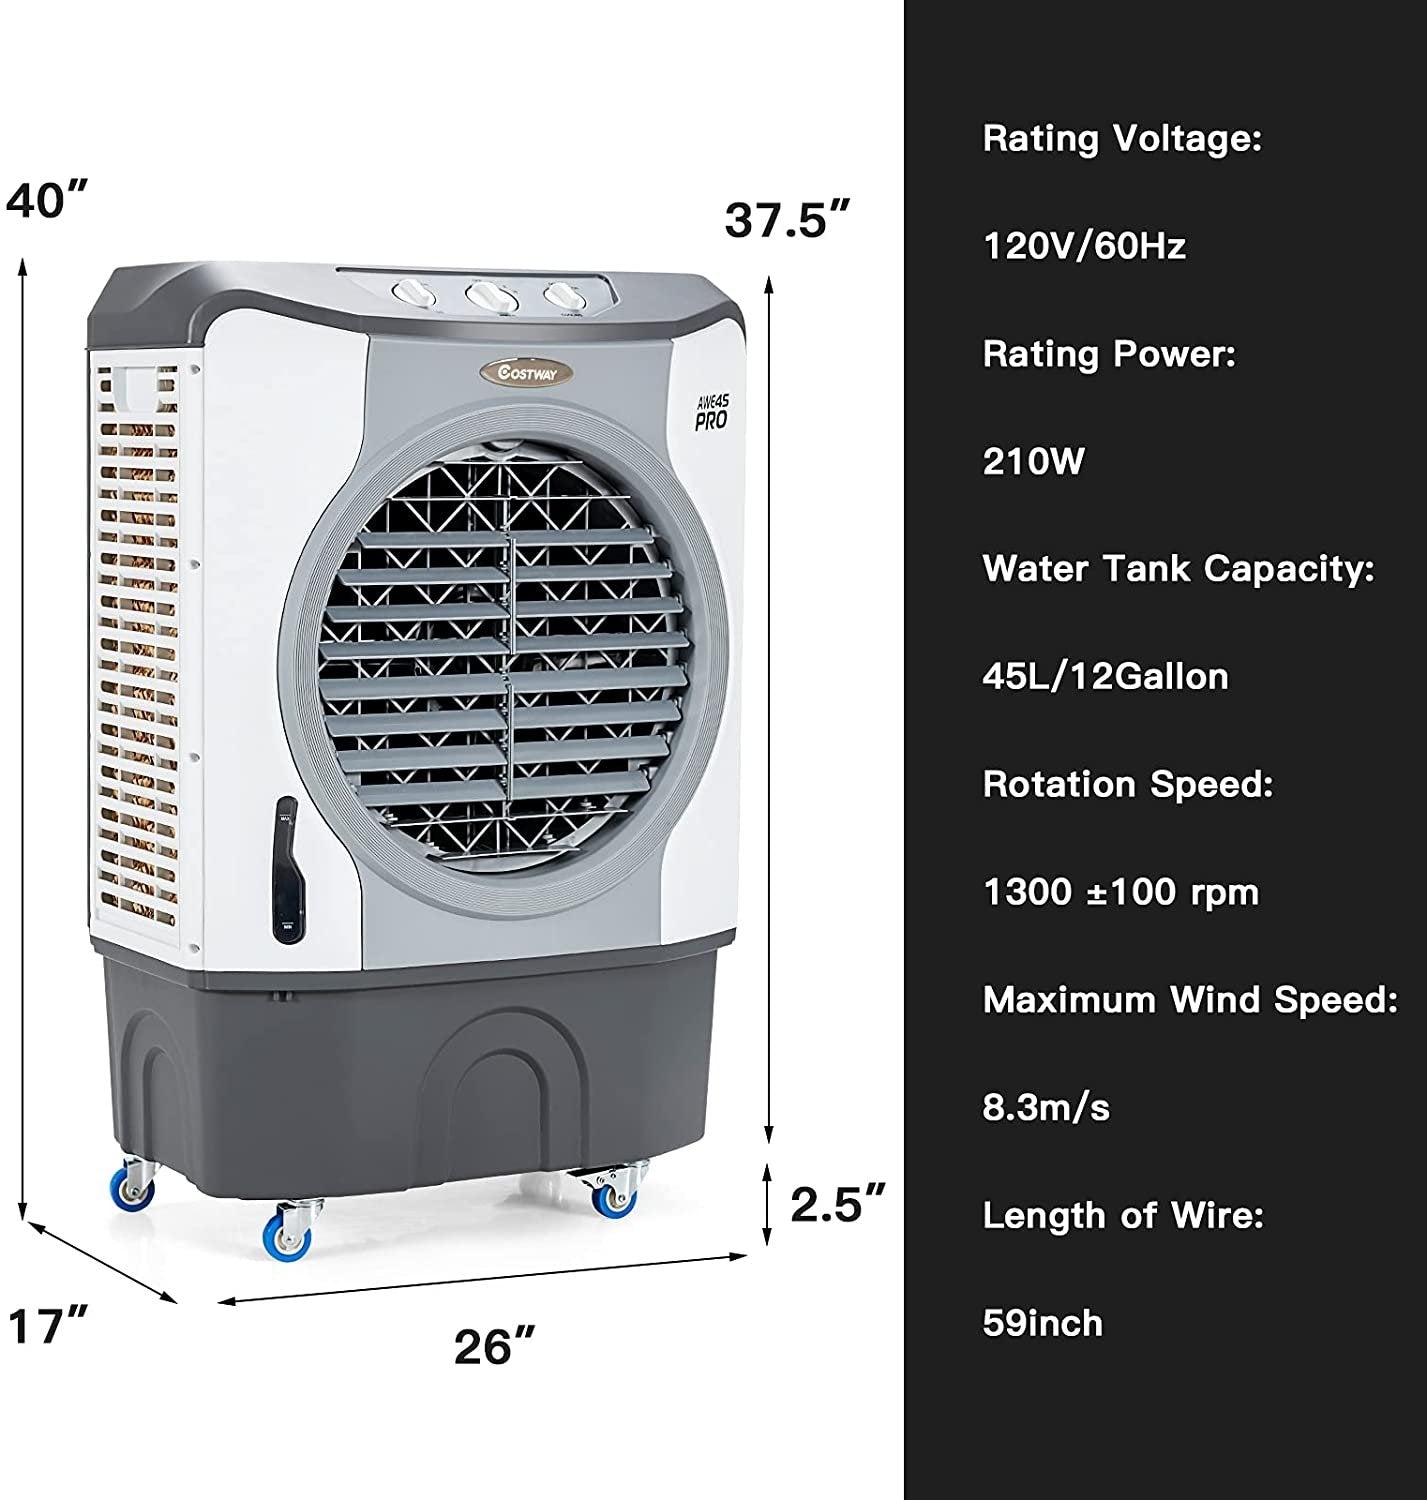 4-in-1 Industrial Evaporative Air Cooler Fan with 12 Gallon Tank and Wheels, Gray